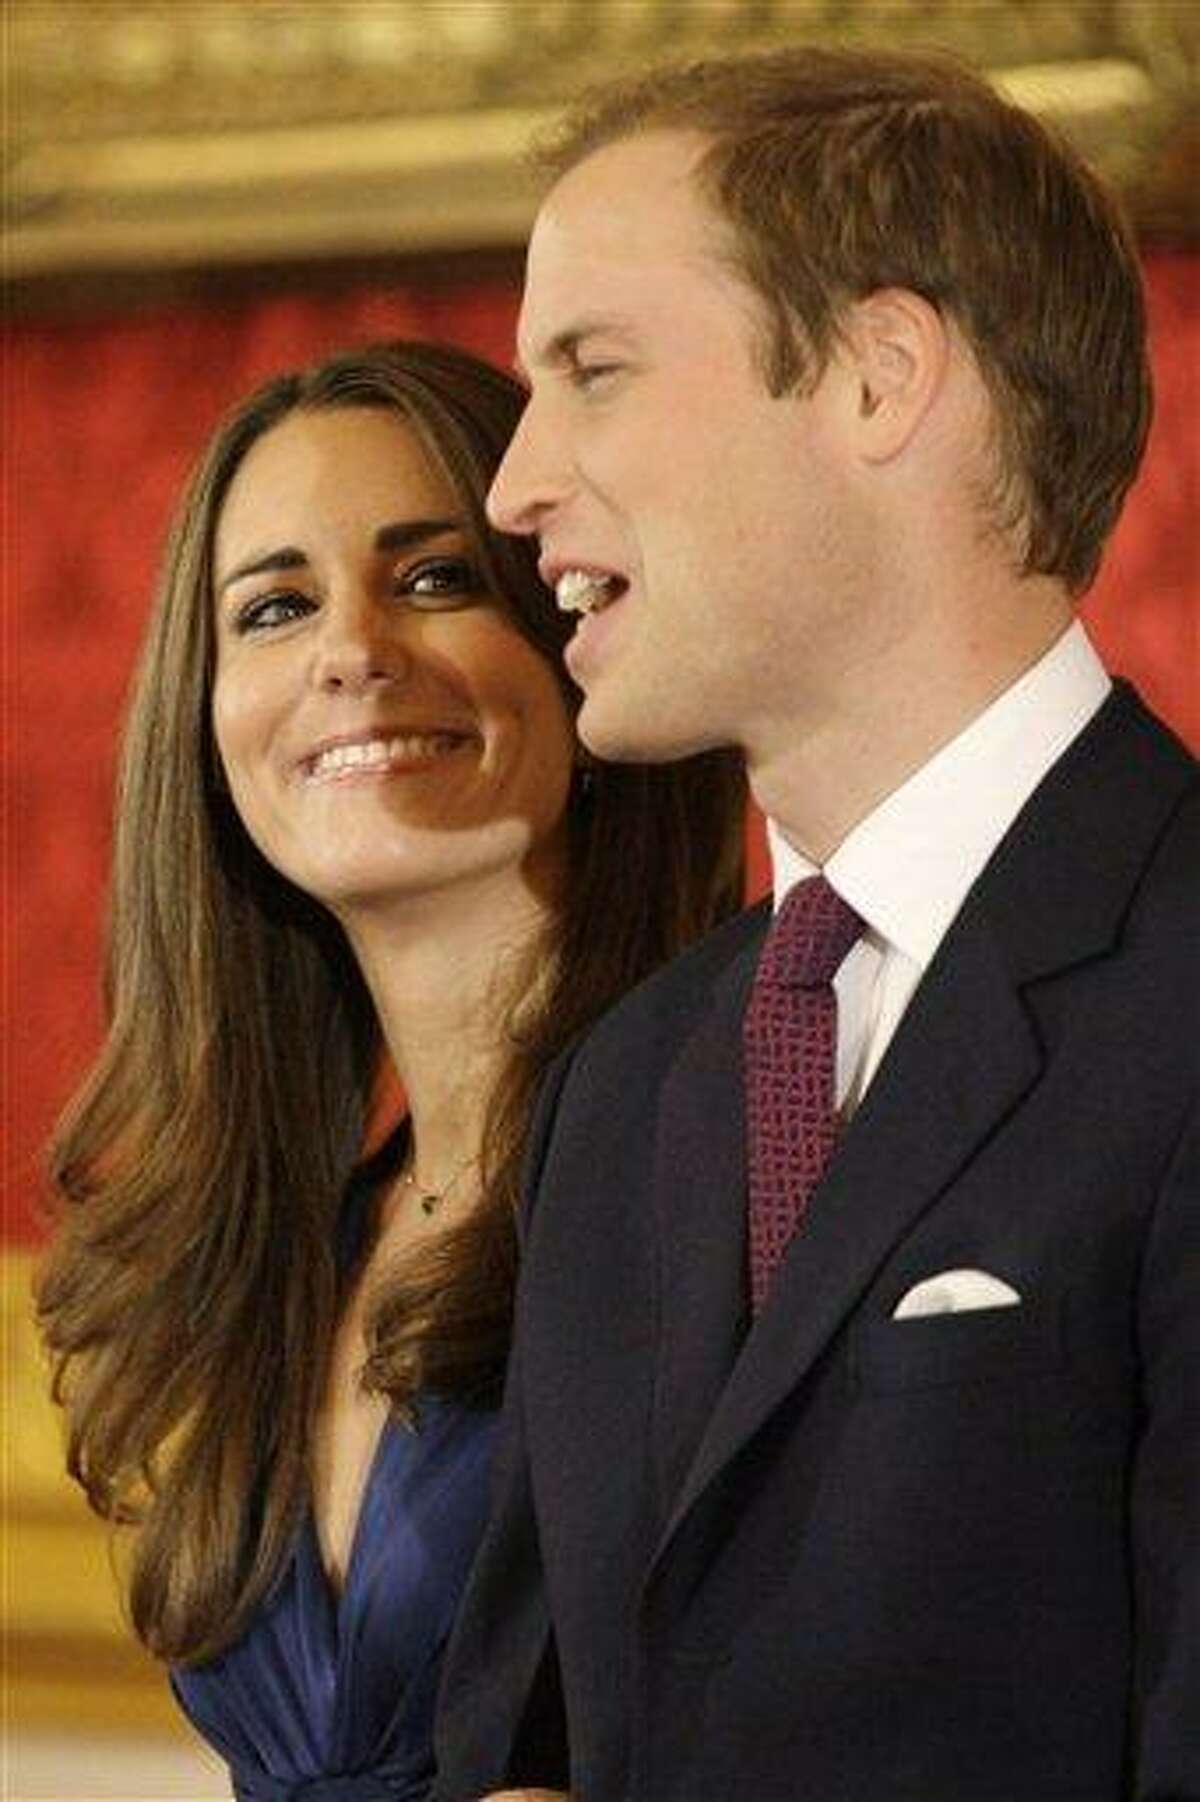 Britain's Prince William and his fiancee Kate Middleton pose for the media at St. James's Palace in London after announcing their marriage, London, Tuesday, Nov. 16, 2010. The couple are to wed in 2011.(AP Photo/Sang Tan)